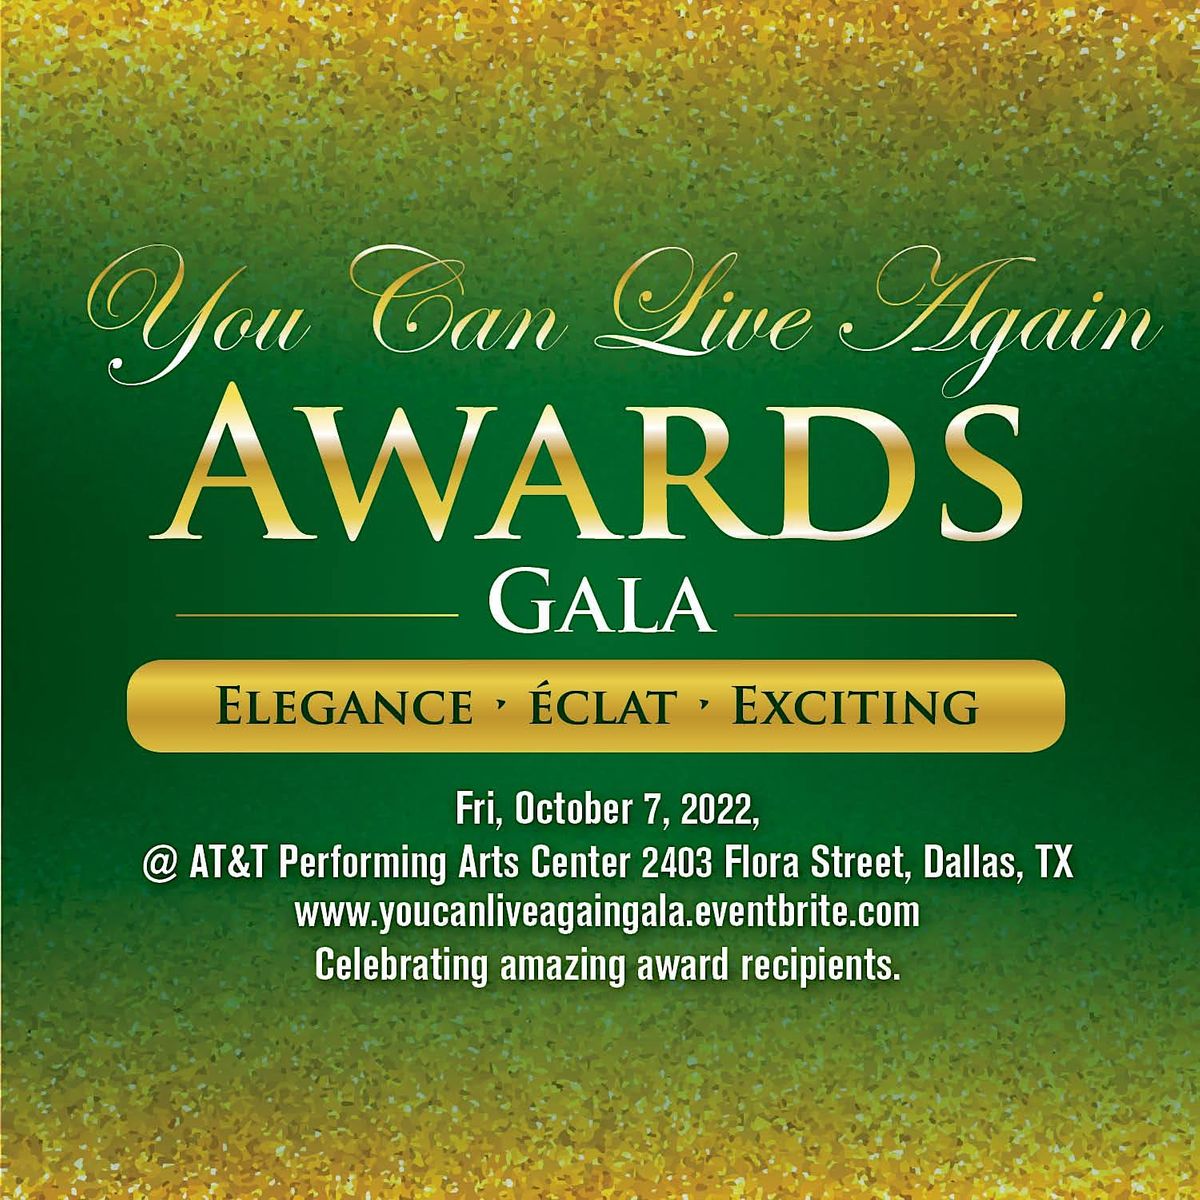 You Can Live Again Awards Gala Oct 7, 2022